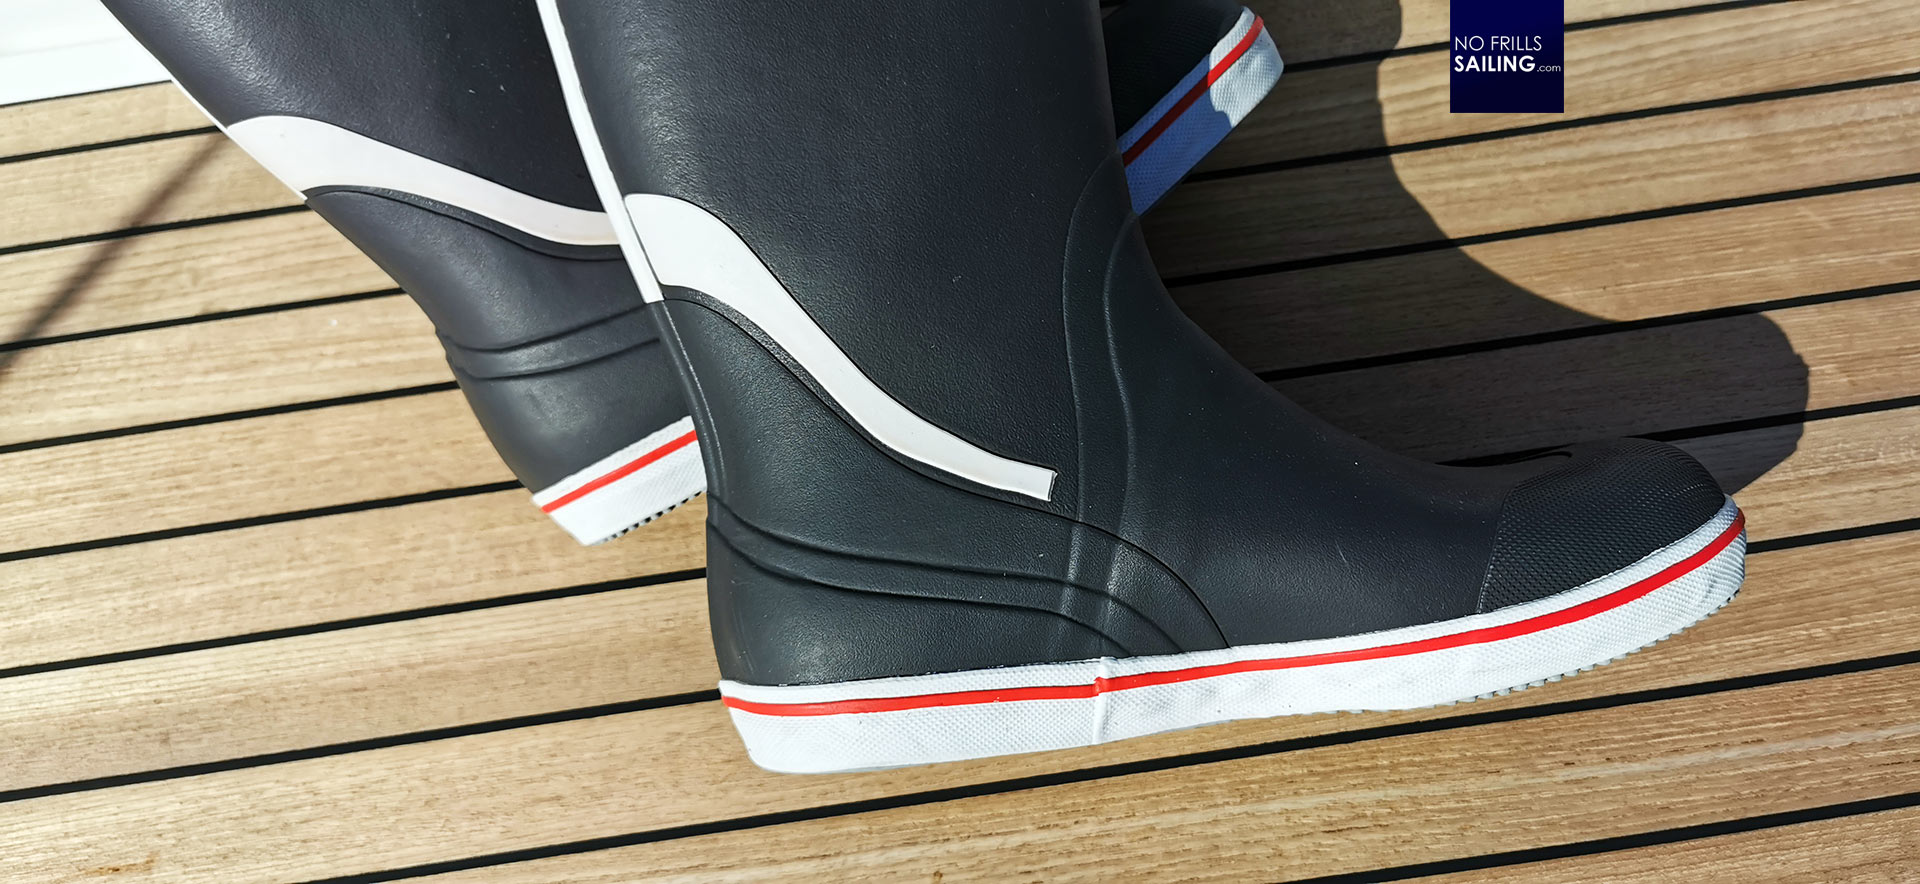 Product Review: Gill Sailing Boots